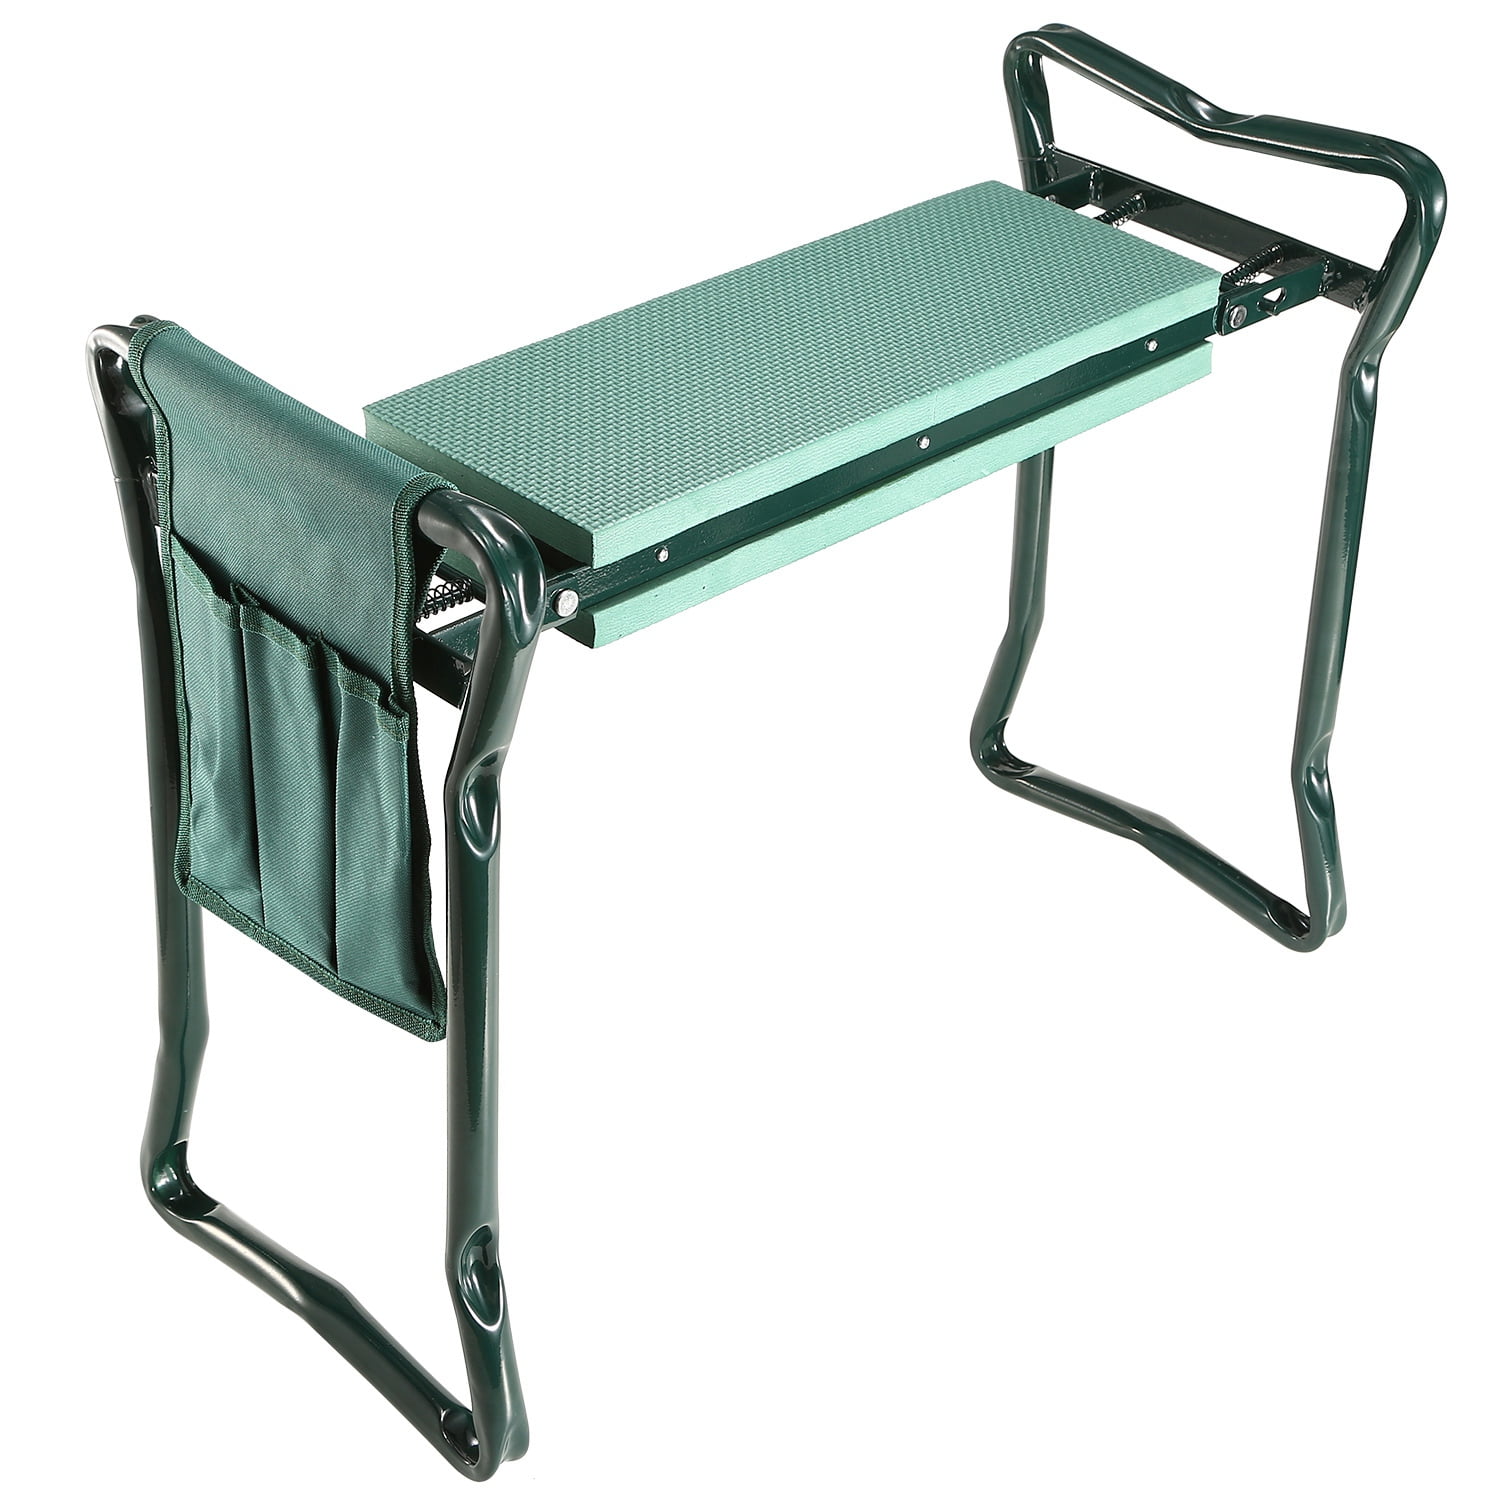 Folding Portable Garden Kneeler Seat Bench Kneeling Pad and Tool Pouch Outdoor 